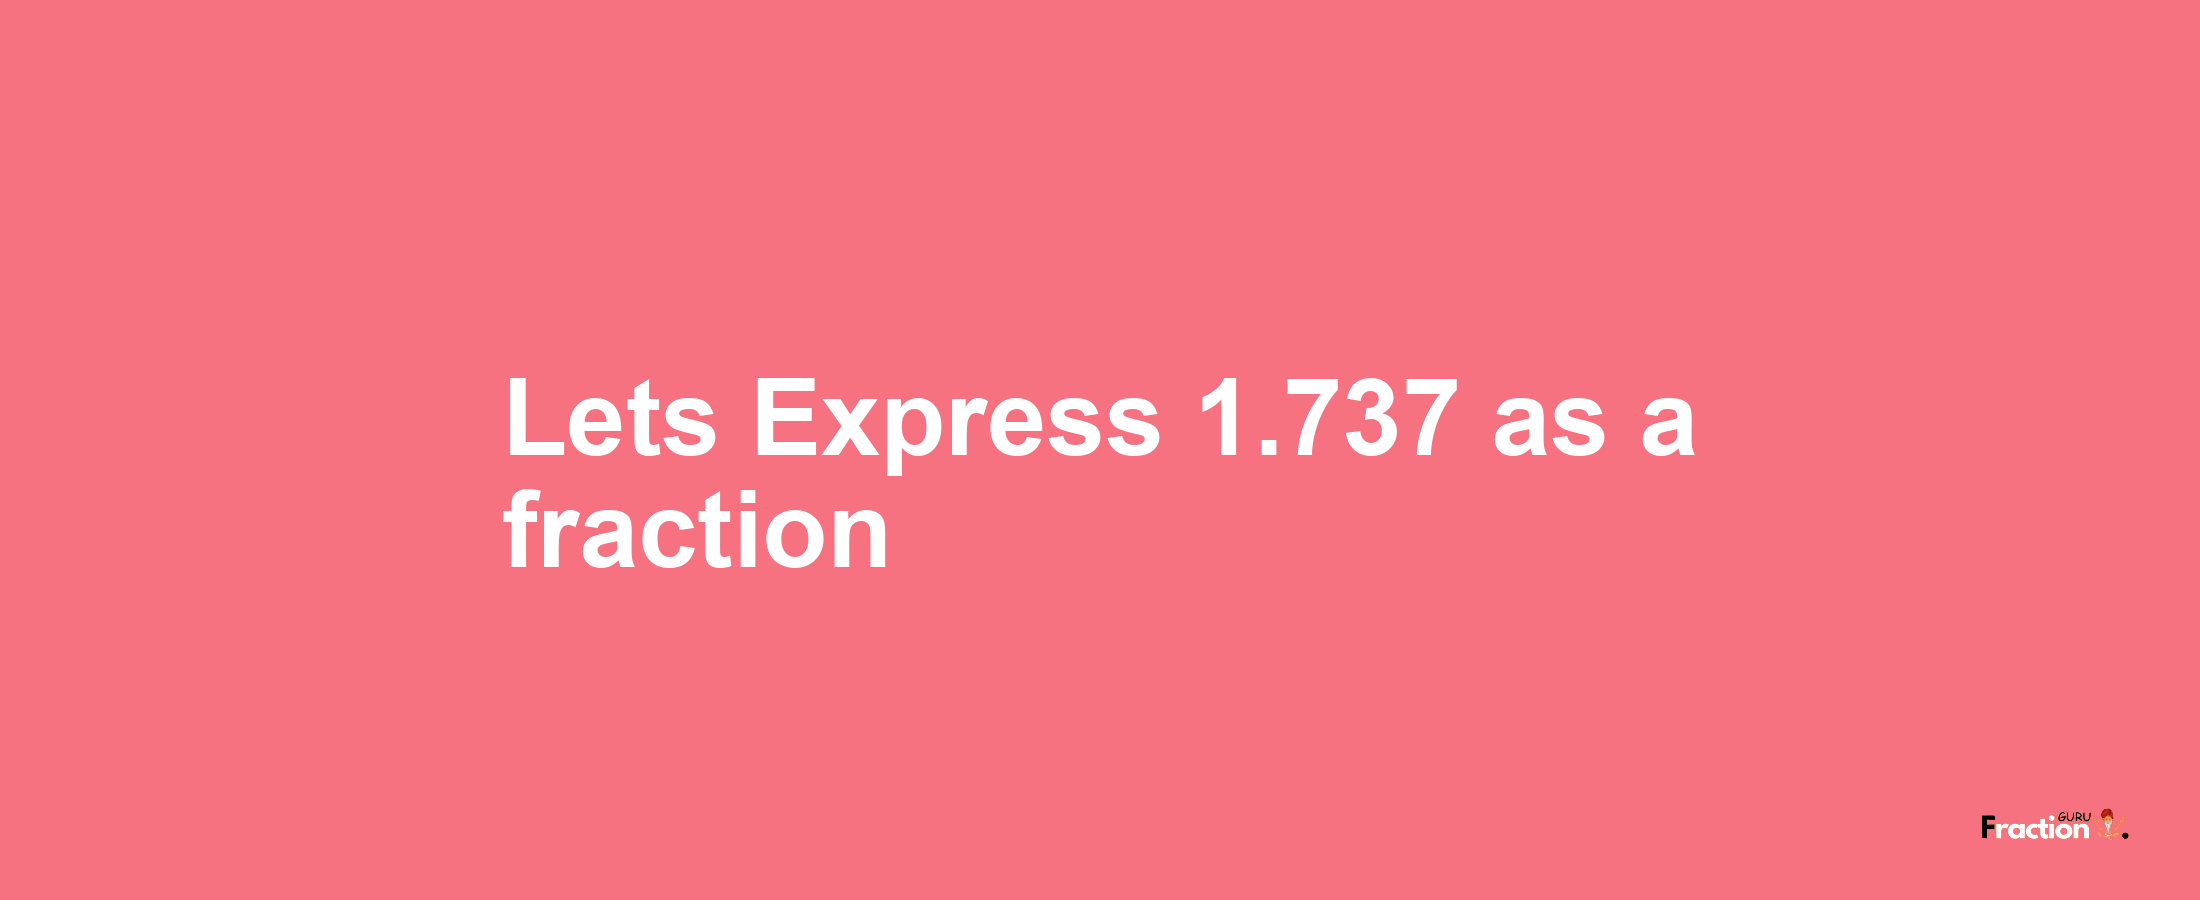 Lets Express 1.737 as afraction